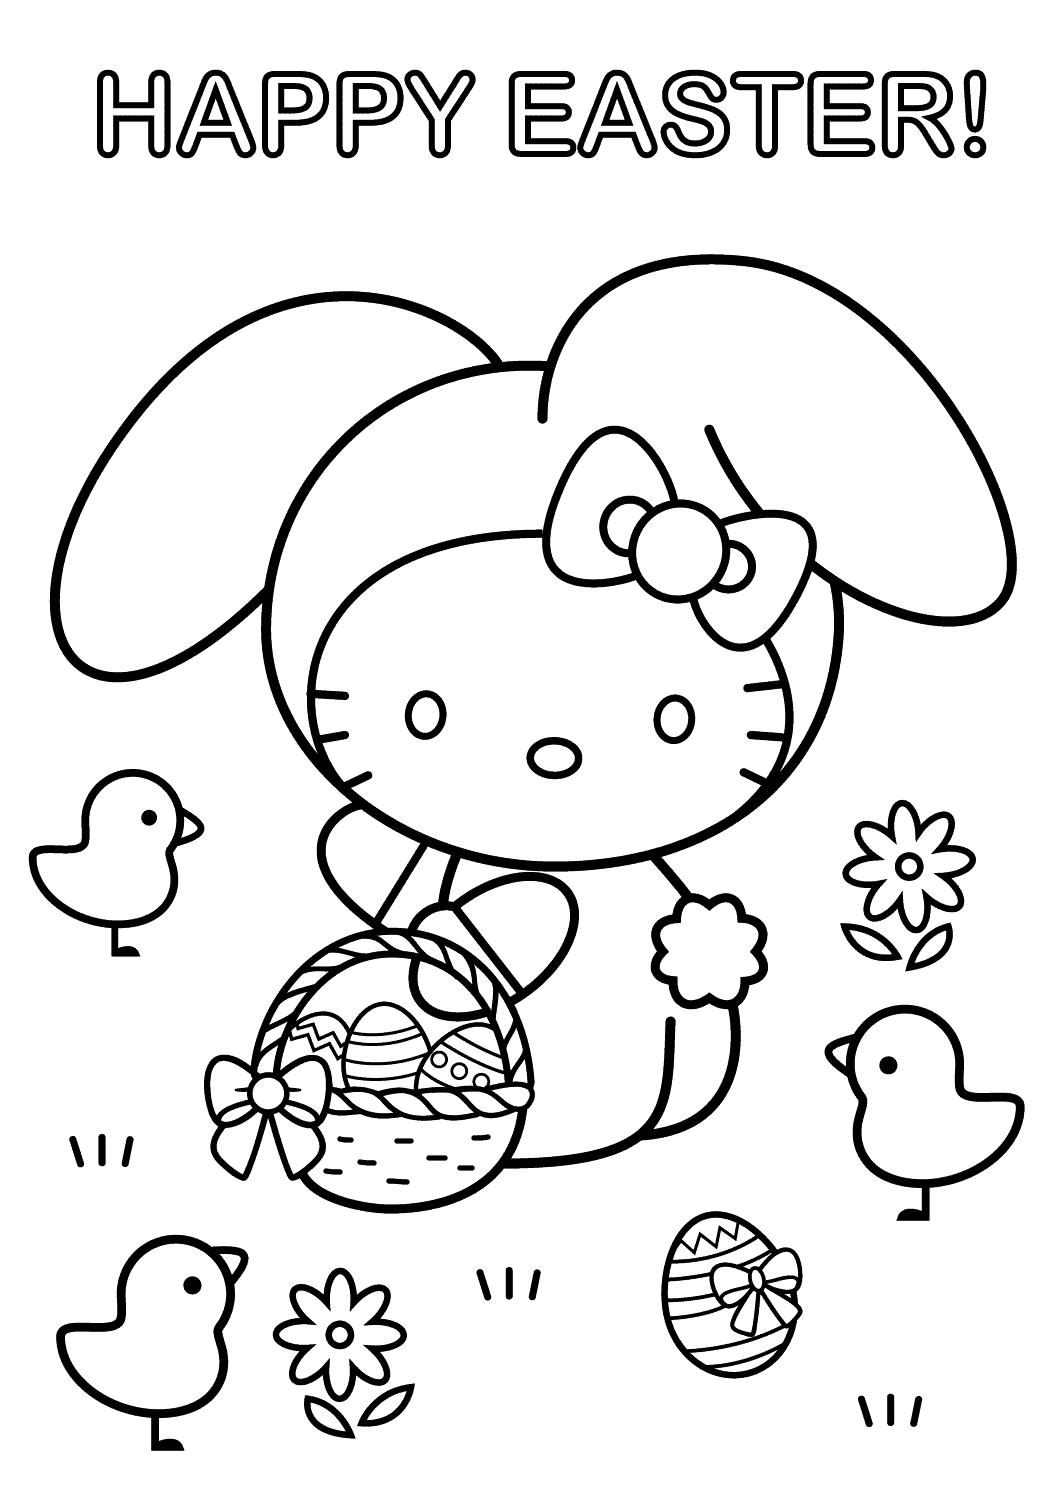 printable colouring sheets for preschoolers easter preschool worksheets best coloring pages for kids preschoolers sheets colouring printable for 